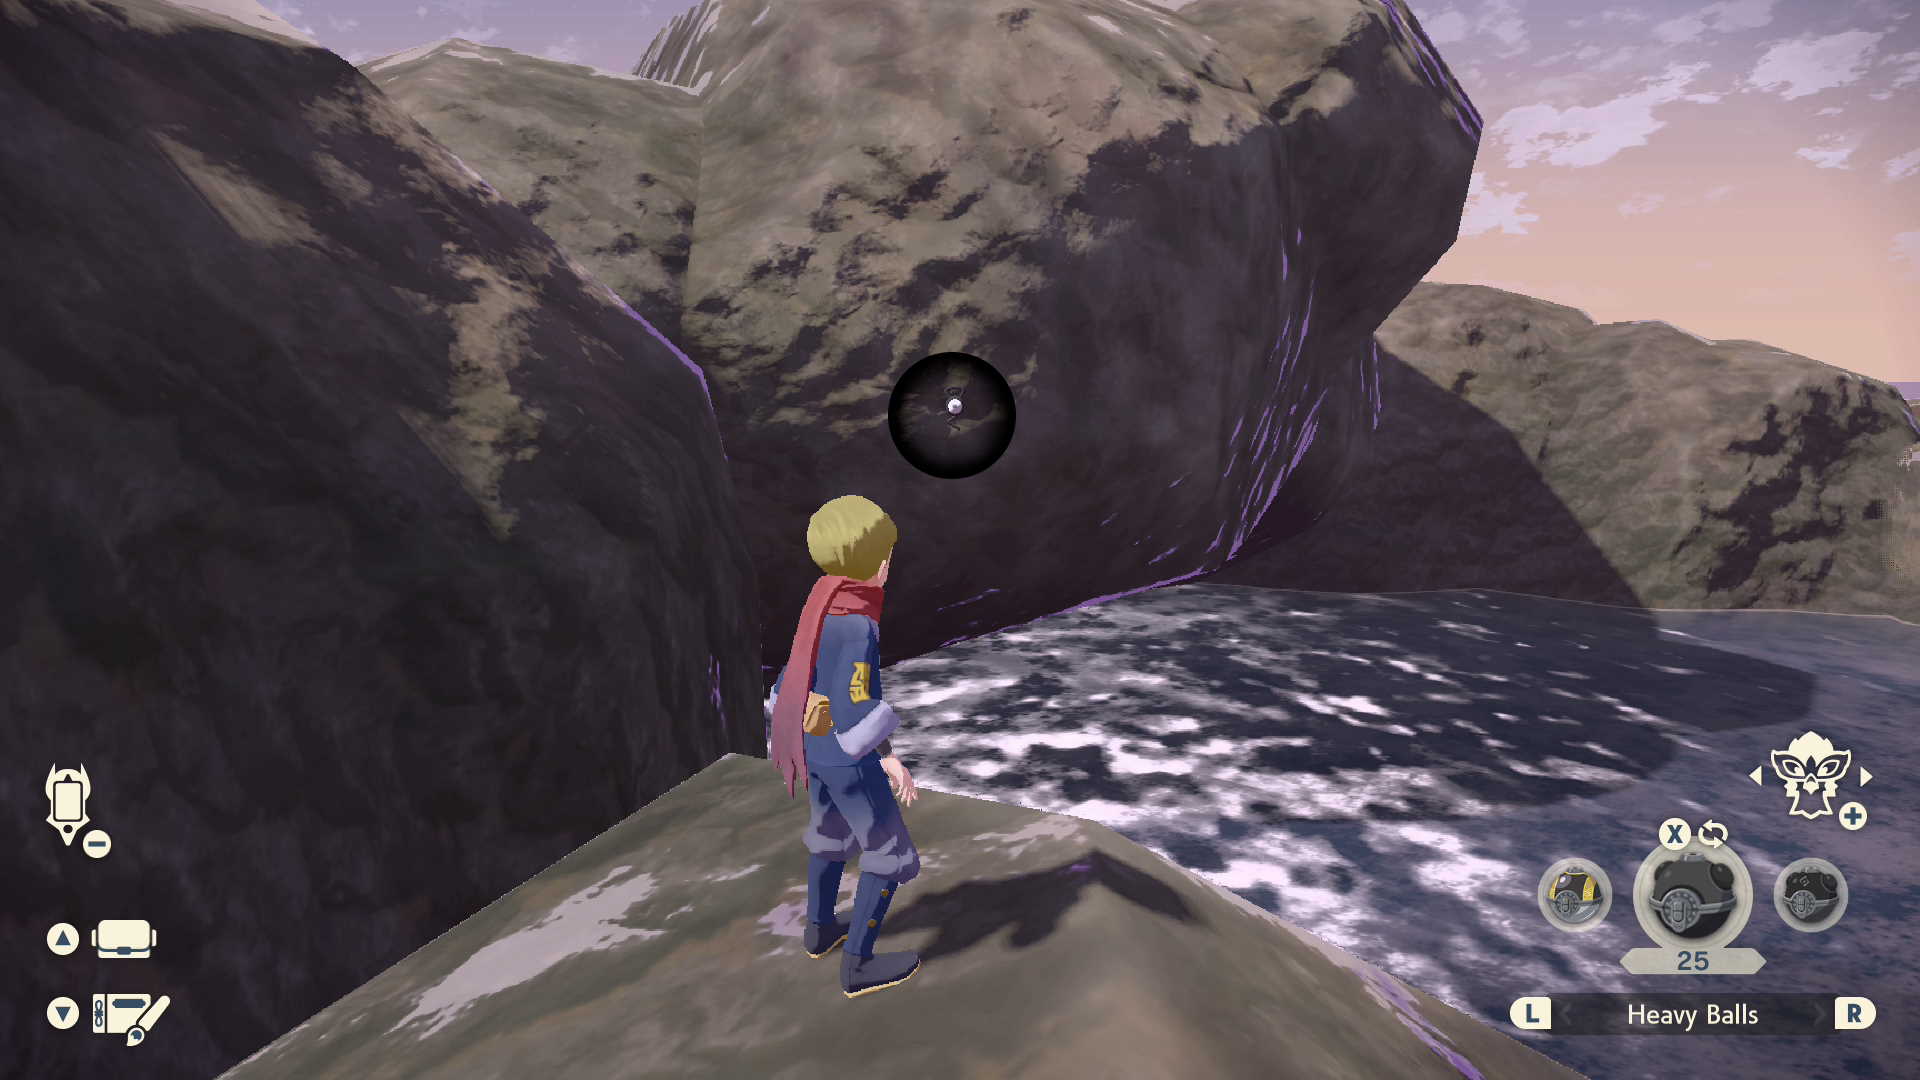 Atop a waterfall of obsidian